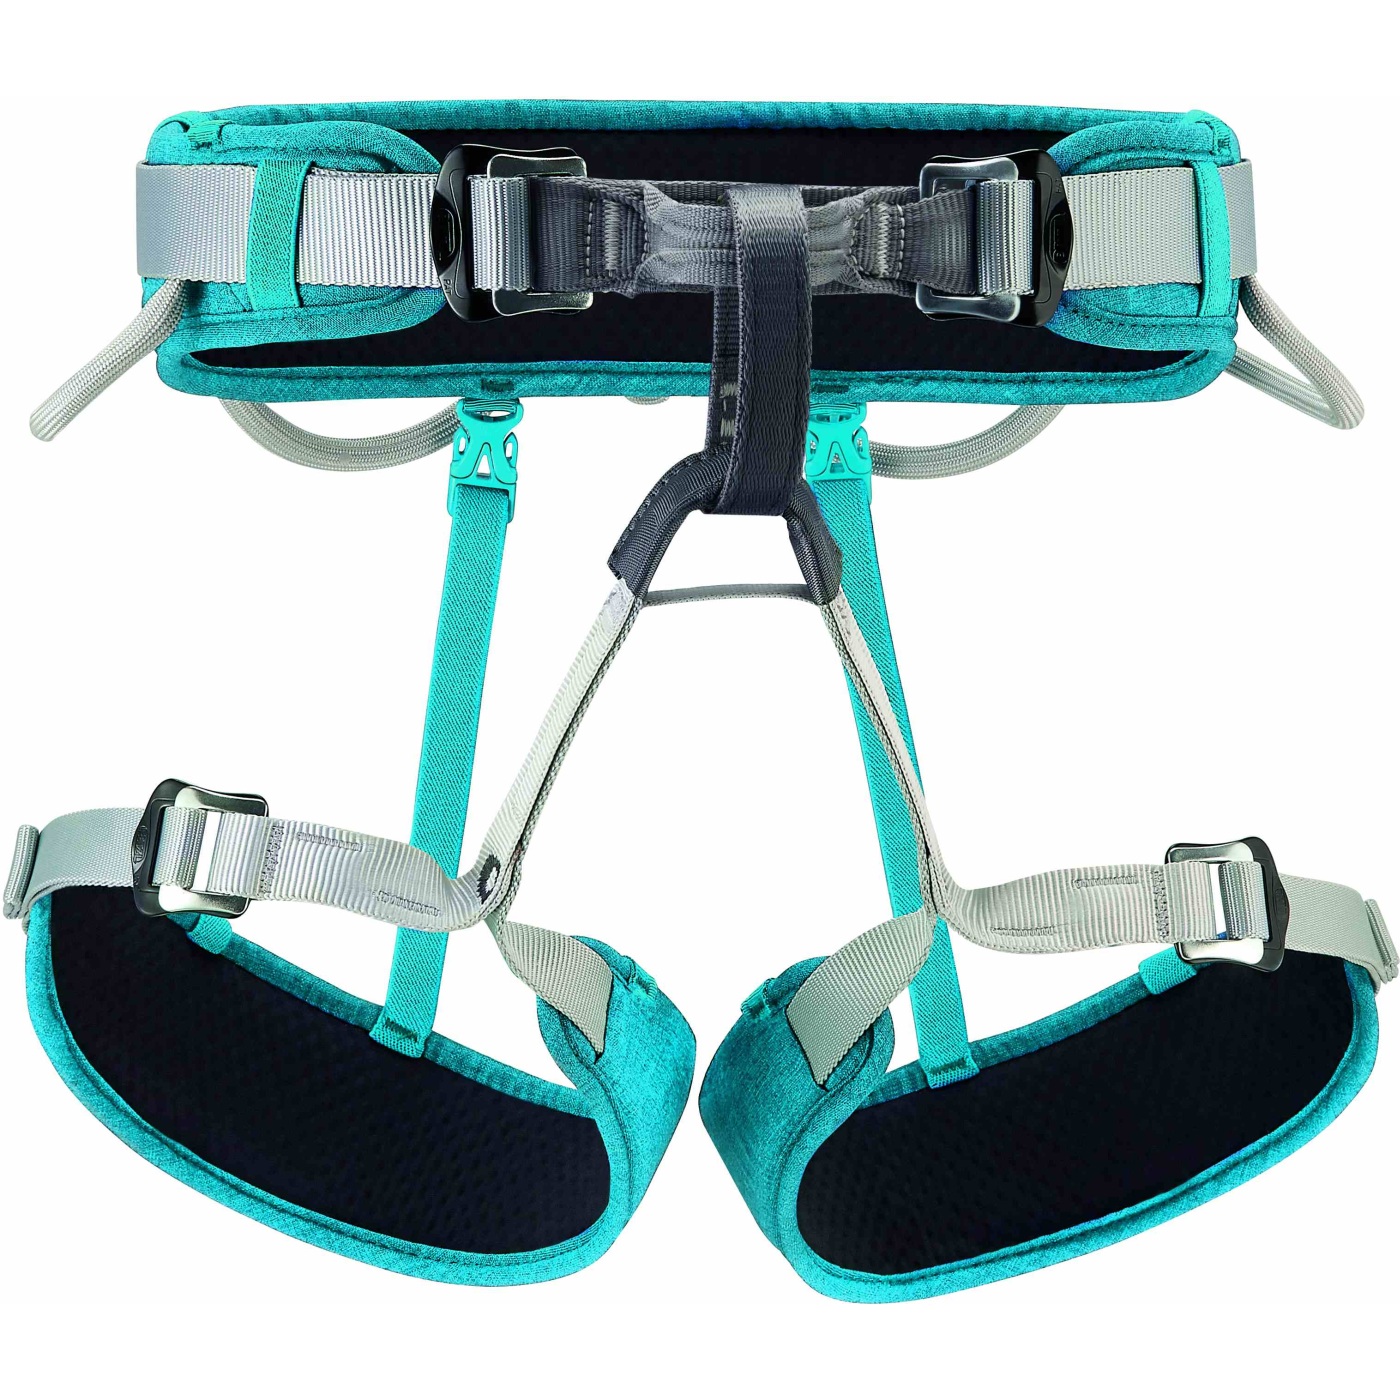 Picture of Petzl Corax Harness - turquoise